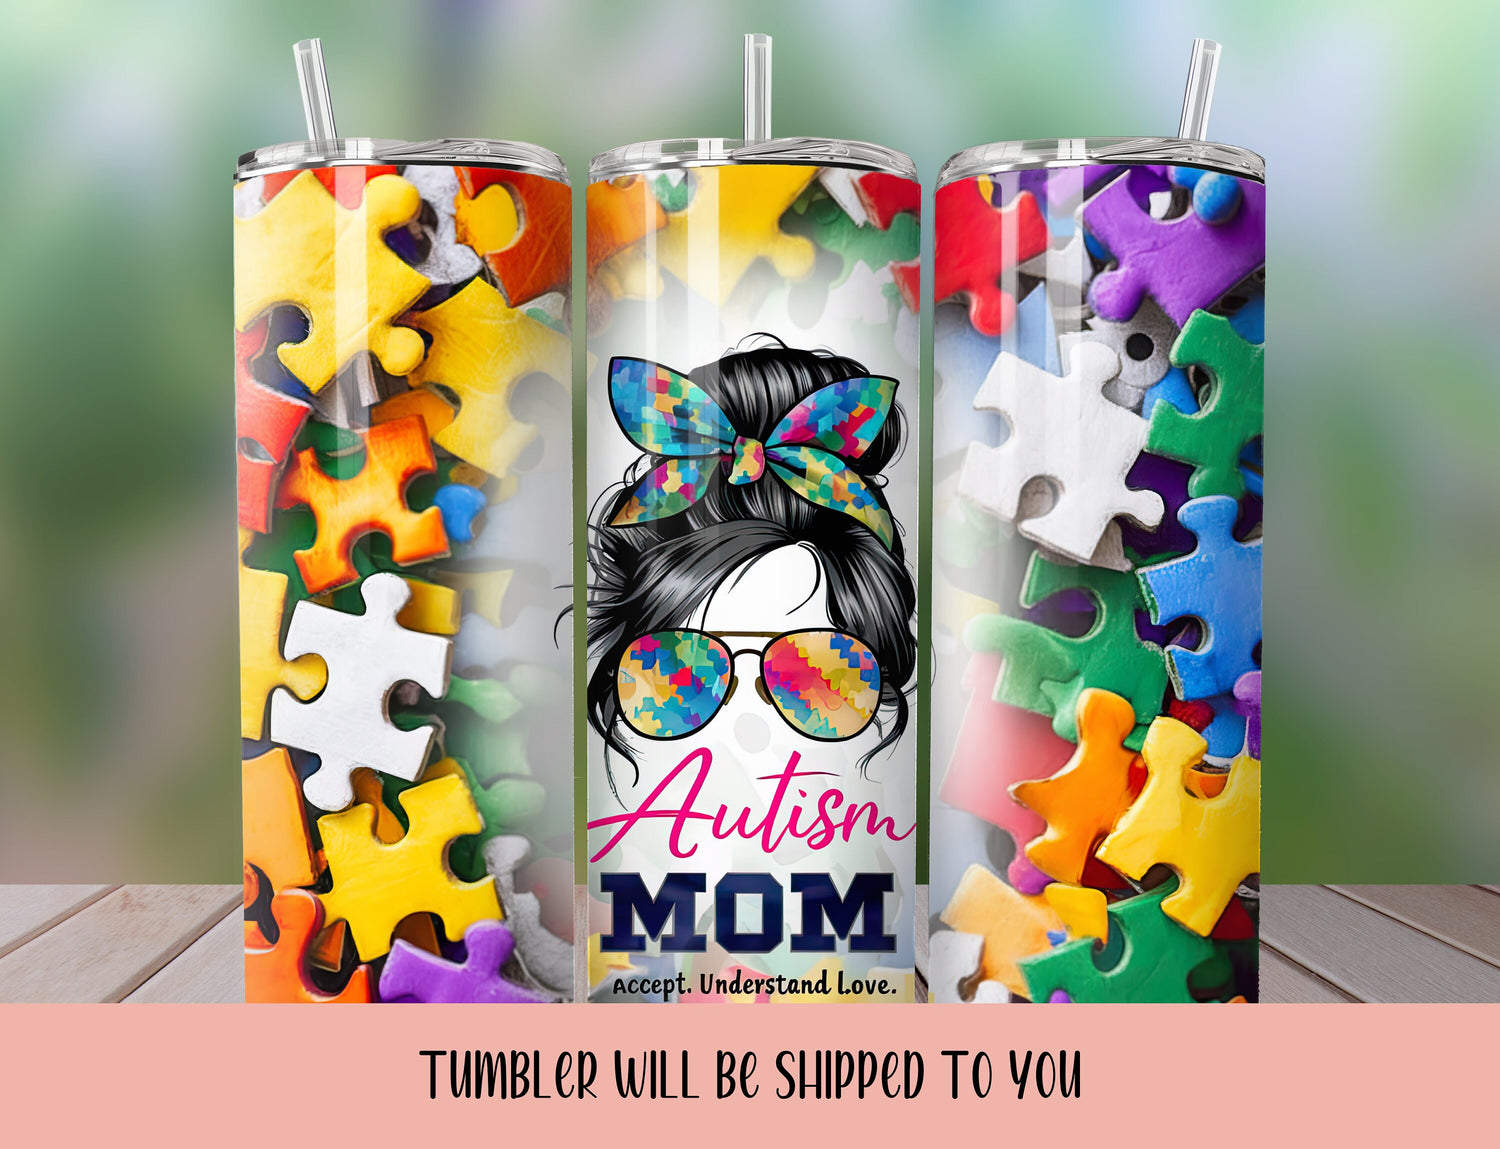 Mothers Day Tumbler | Mothers Day Gift |  Autism Mom Tumbler  | Autism Tumbler |  Colorful Tumbler | Personalized Mothers Day Gift - Inspired BYou Home Decor